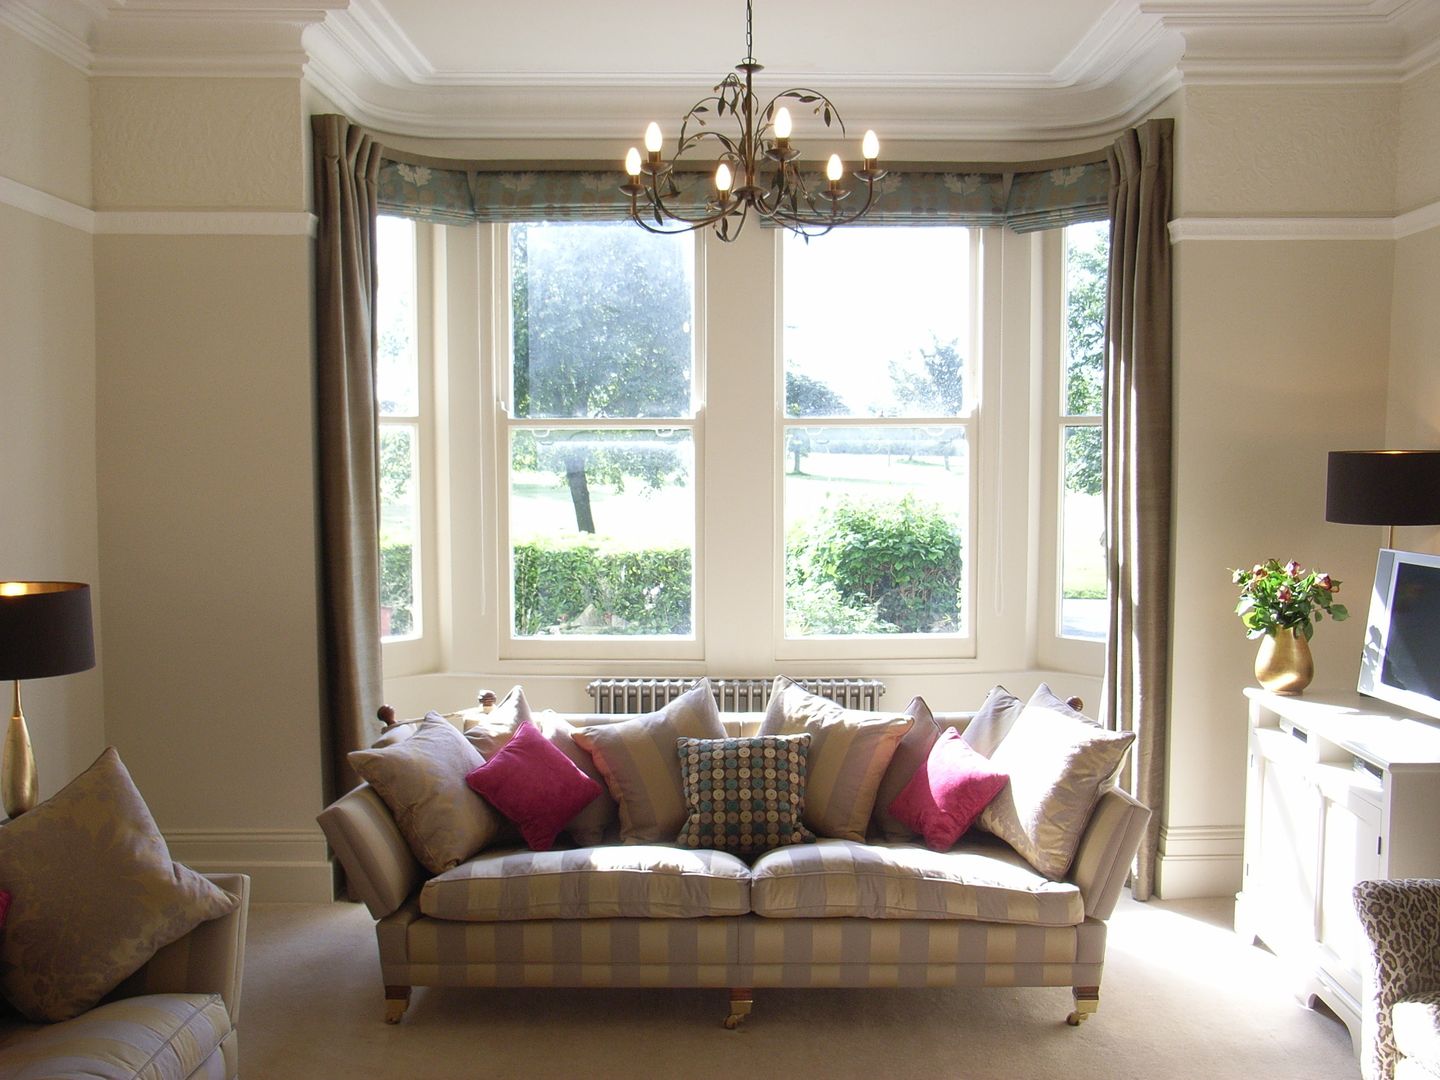 Classic View of Contemporised Victorian Living Room homify Salas de estilo clásico large bay window,roman blinds,dress curtains,victorian home,victorian property,classic sofa,large sofa,taupe colour scheme,pink accents,living room decor,living room furnish